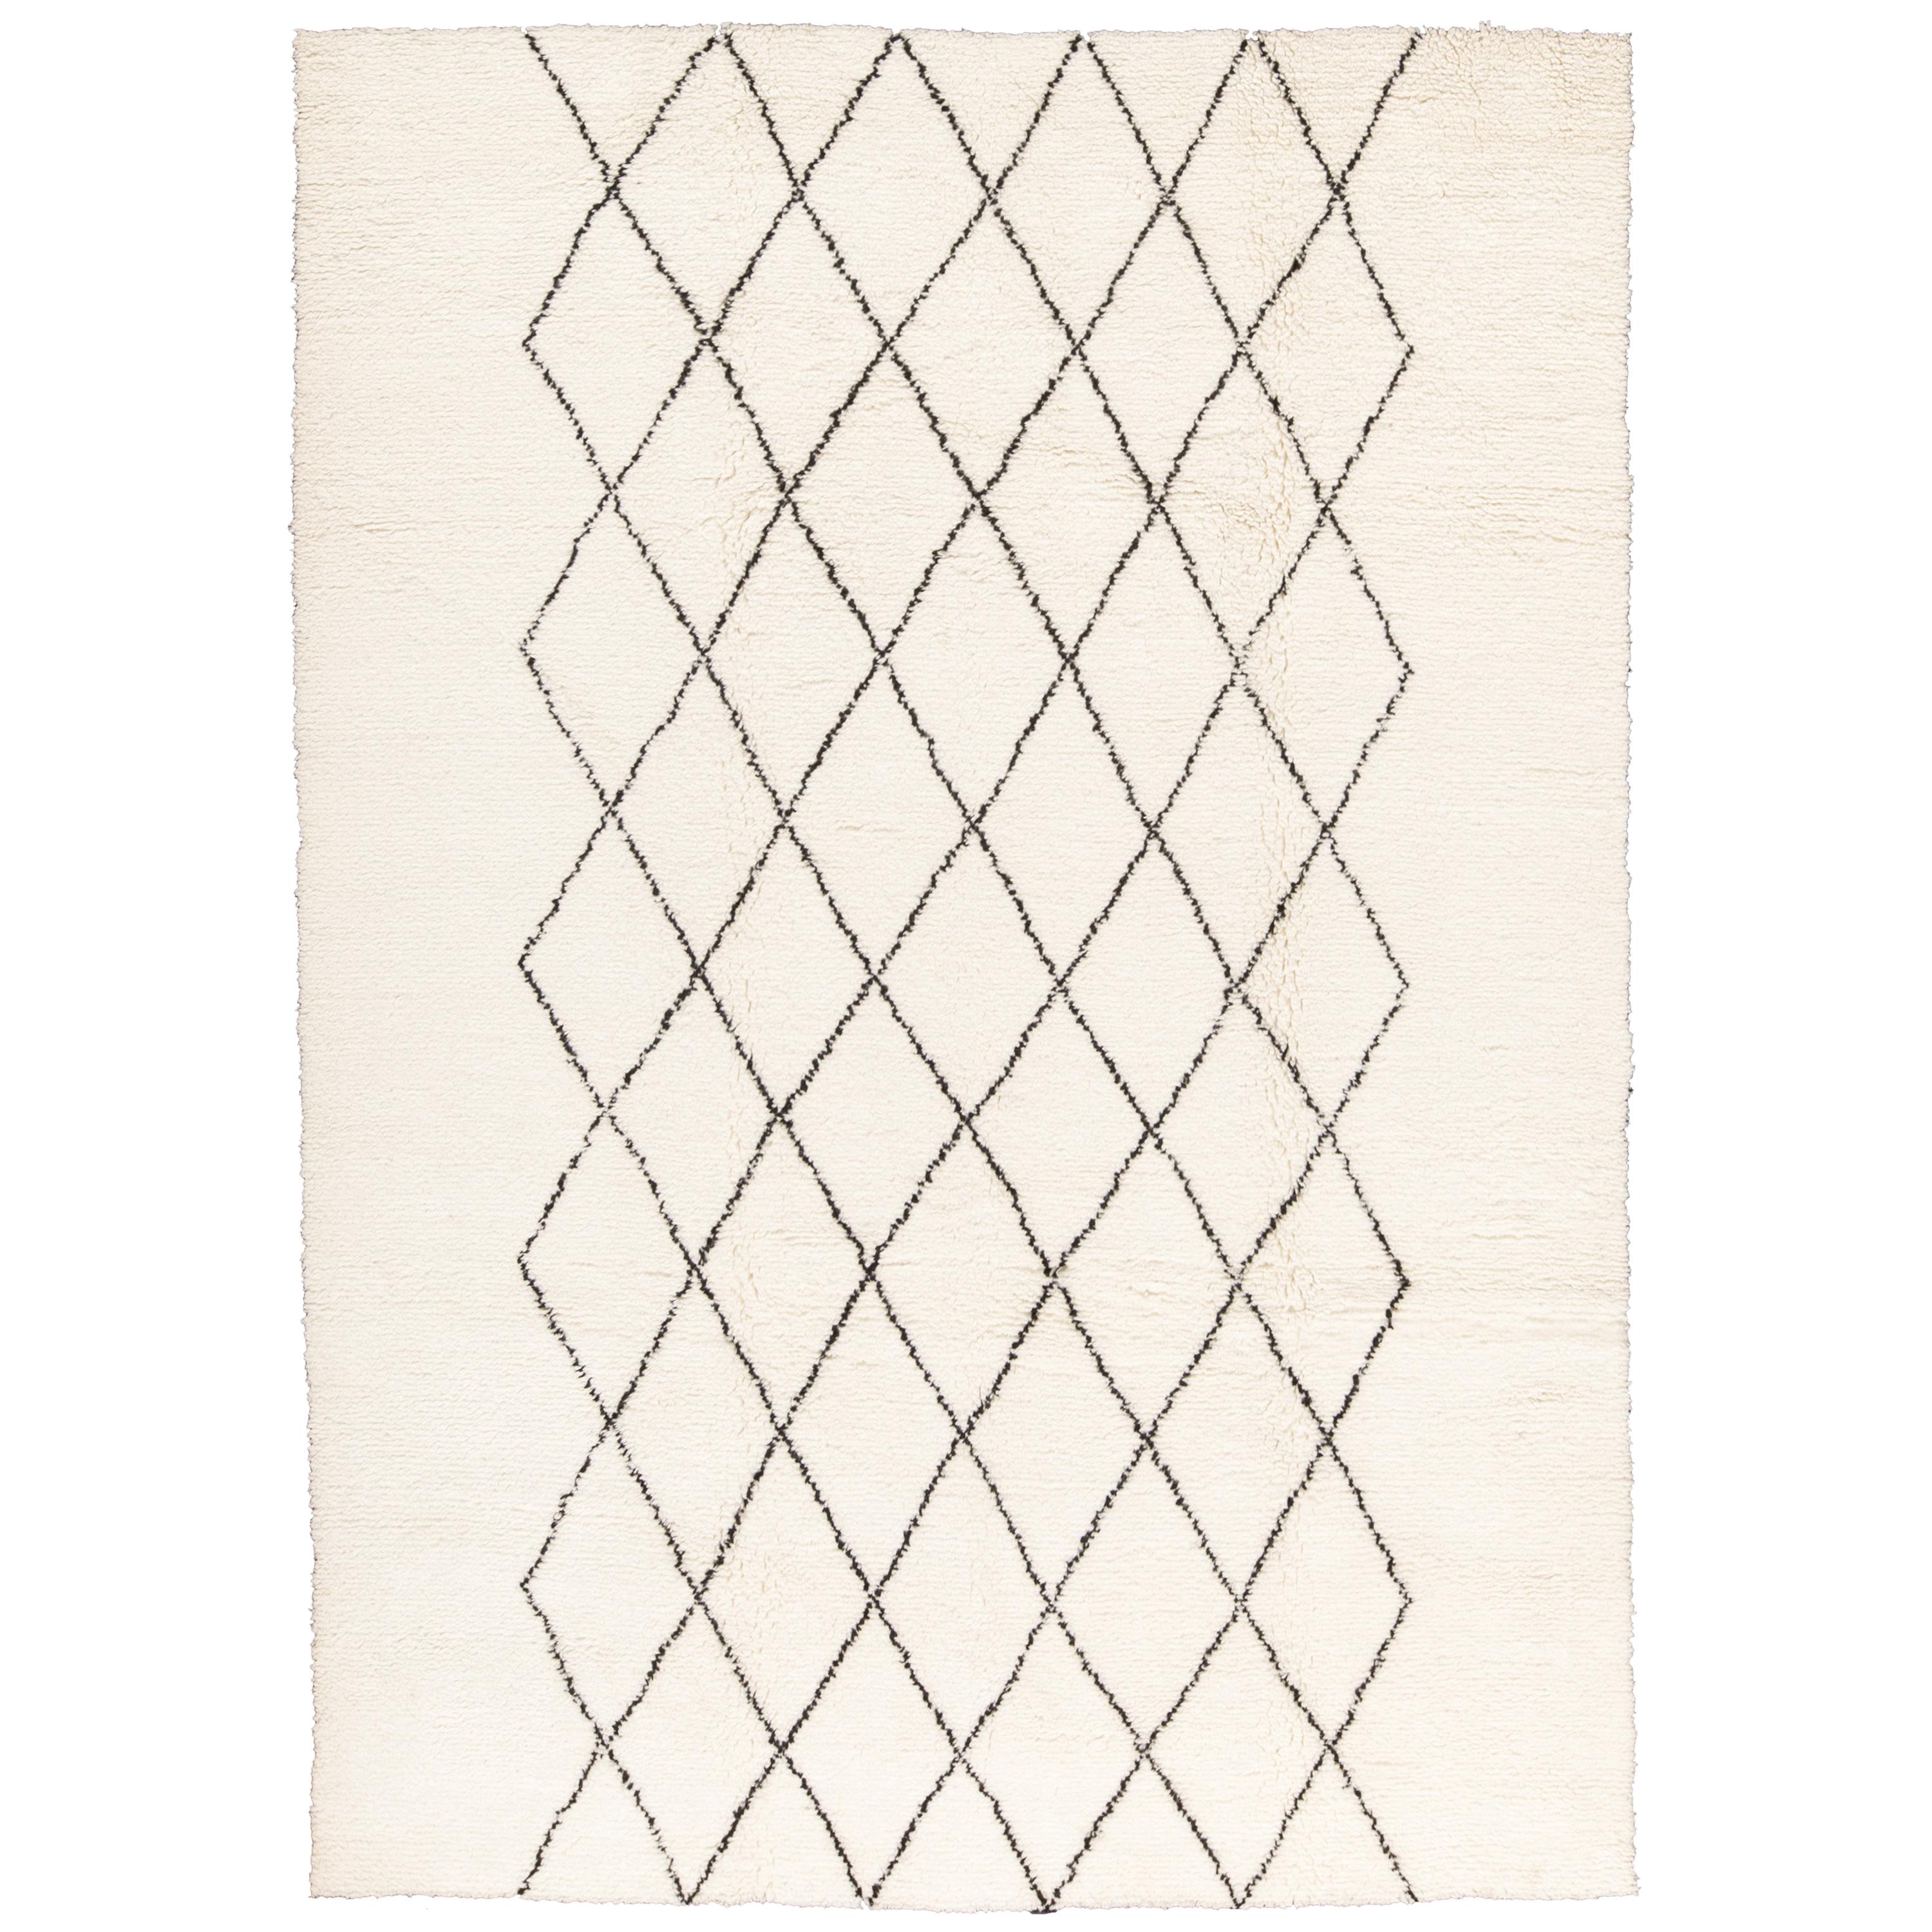 Contemporary Moroccan Style Ivory and Black Wool Rug with Diamond Pattern